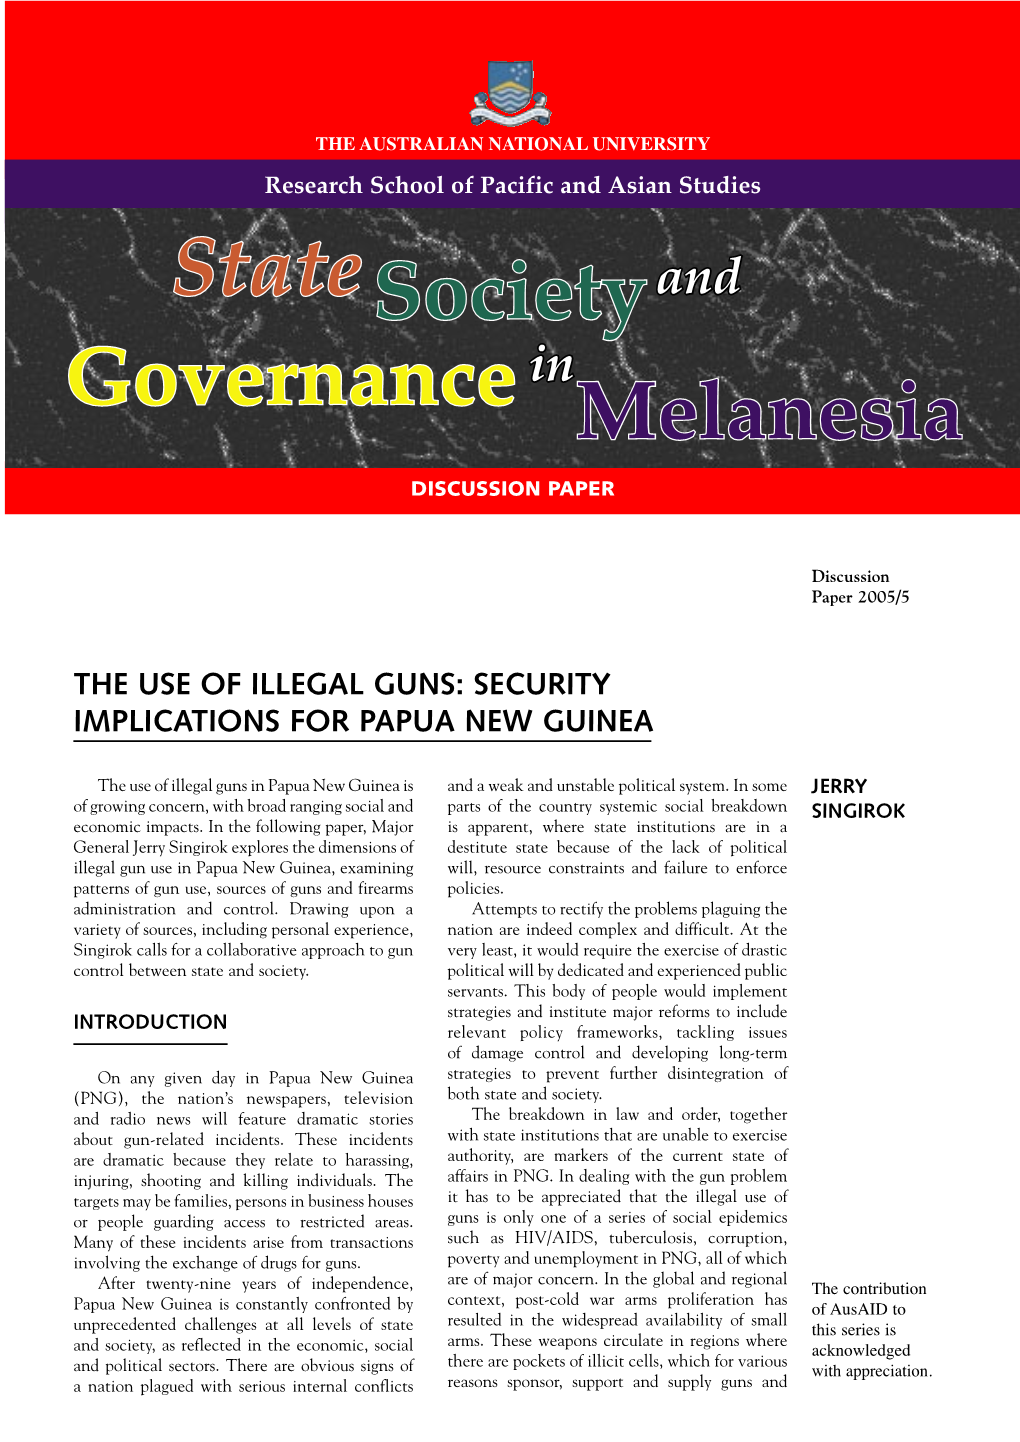 The Use of Illegal Guns: Security Implications for Papua New Guinea